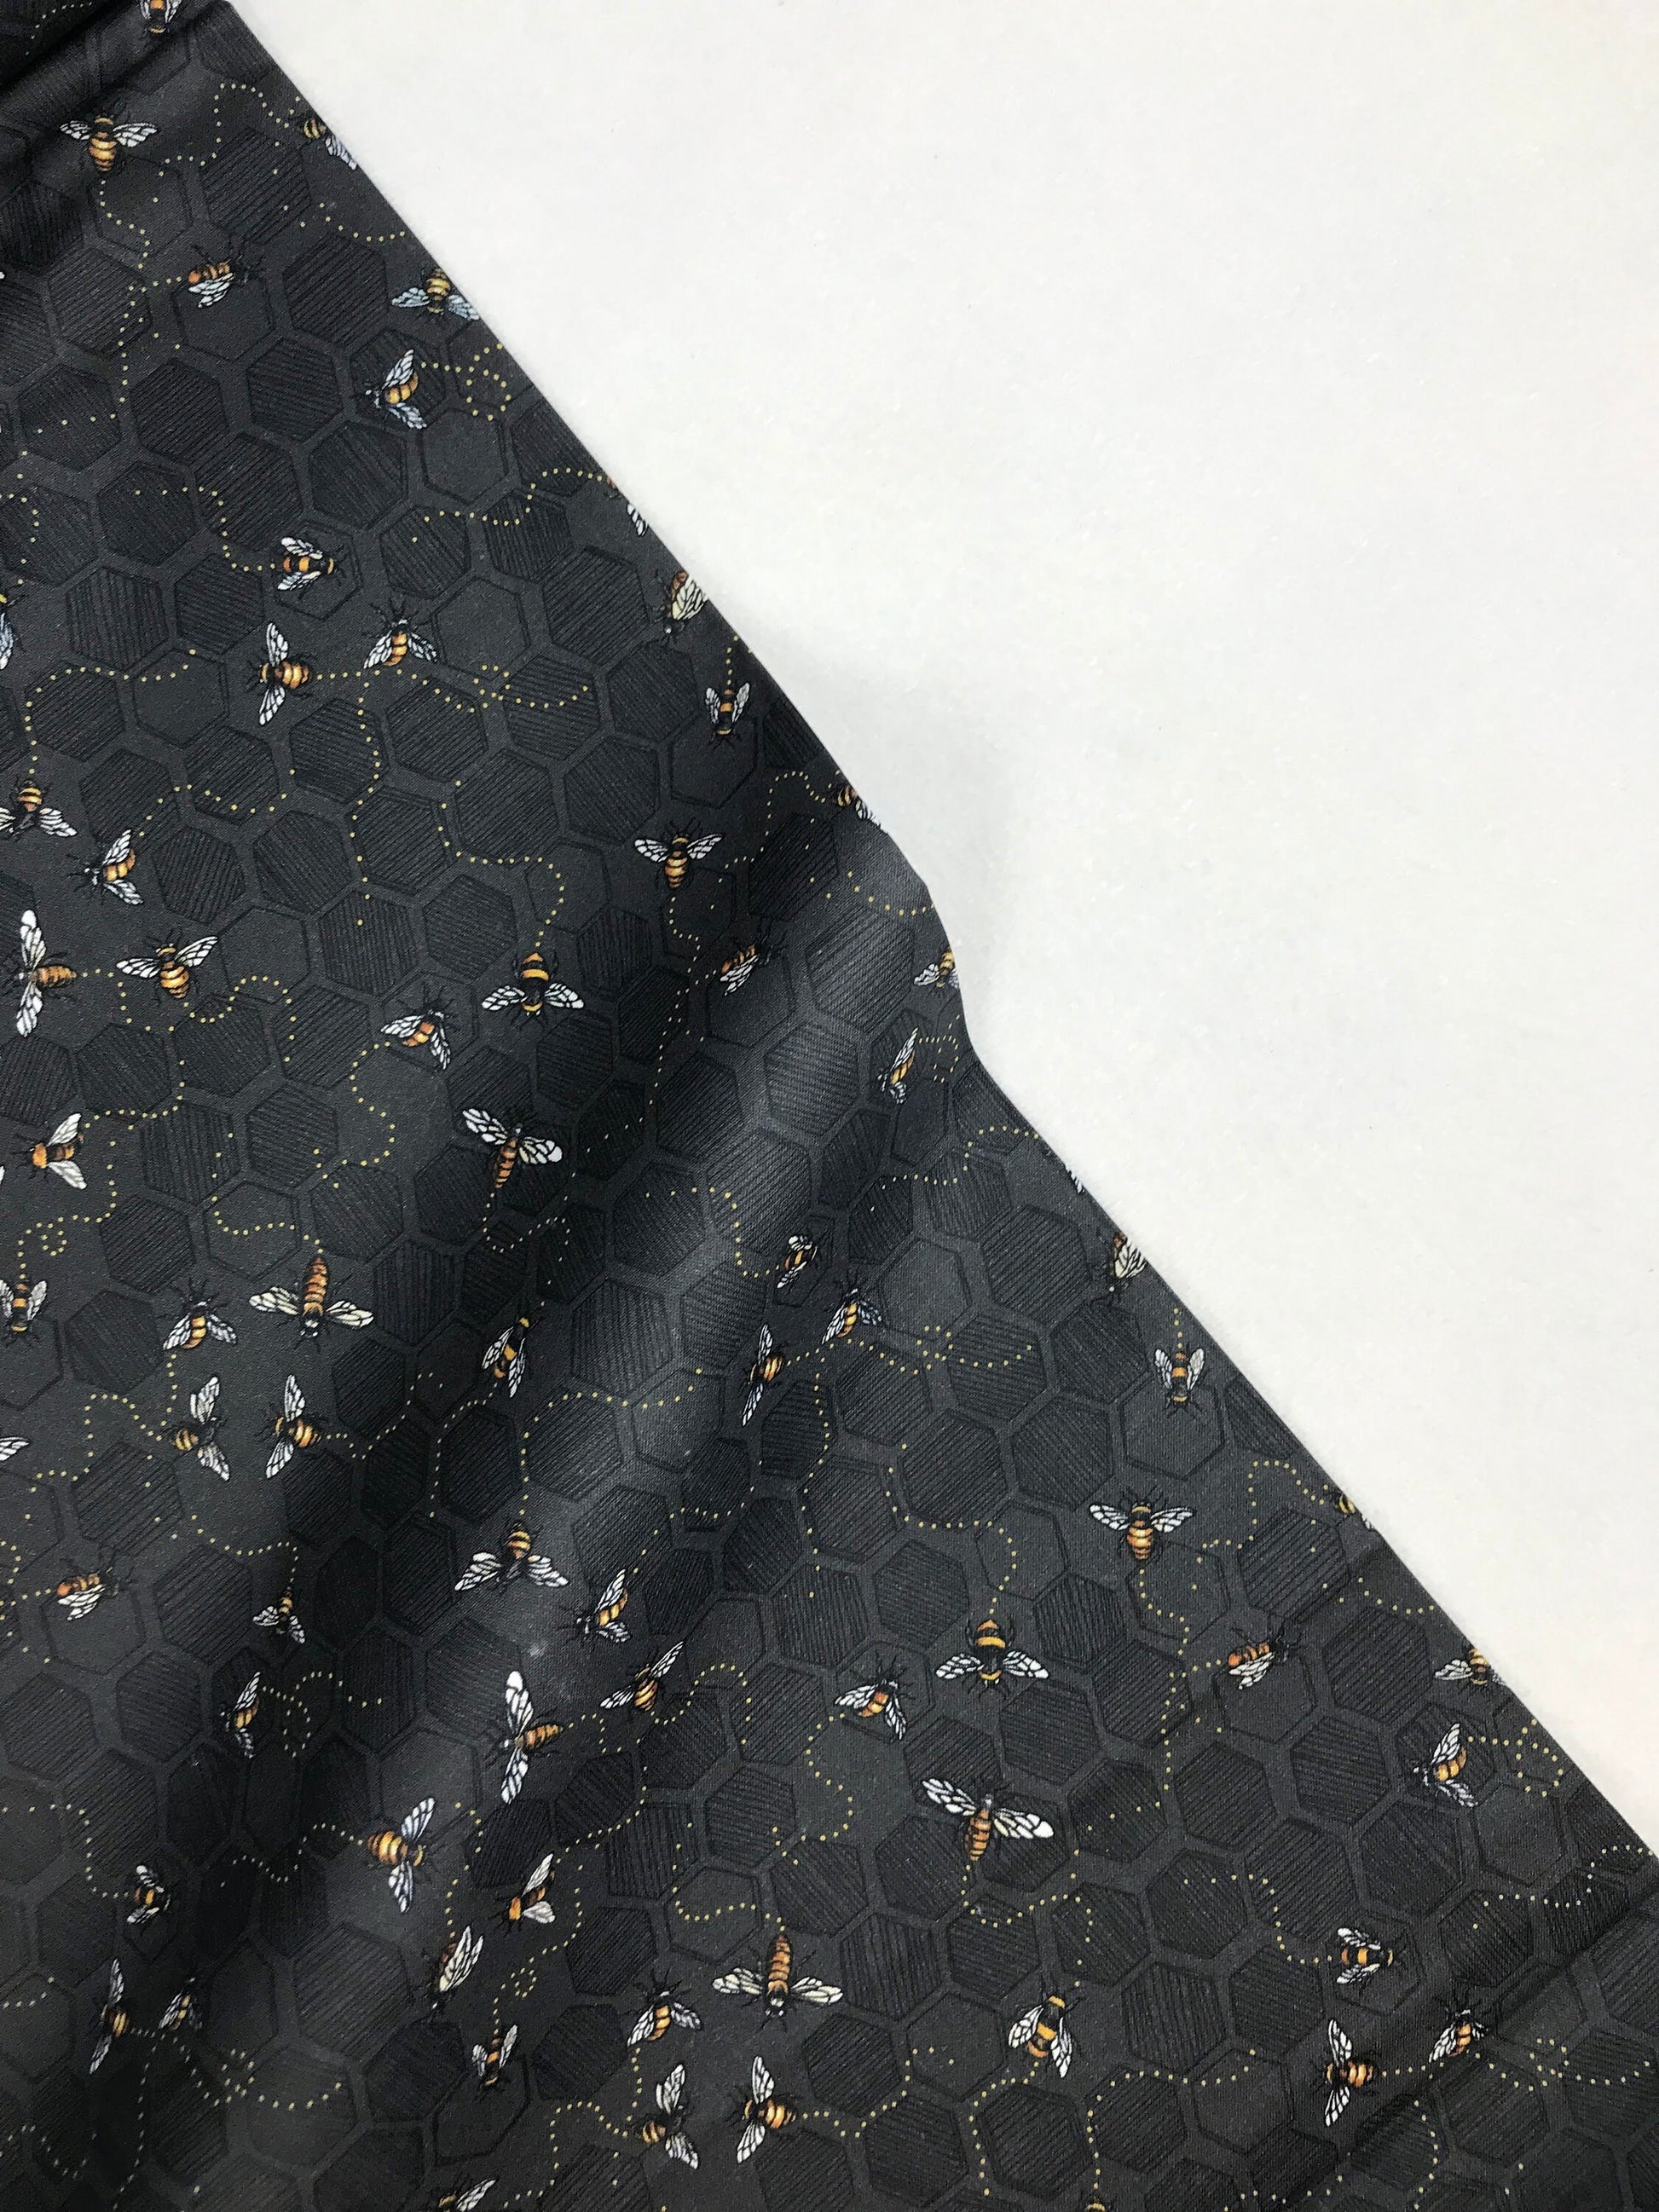 Bees Black Bee Kind Honeycomb Paintbrush Studio Fabric 100% Quilters Cotton 120 2099221 Fabric Fetish